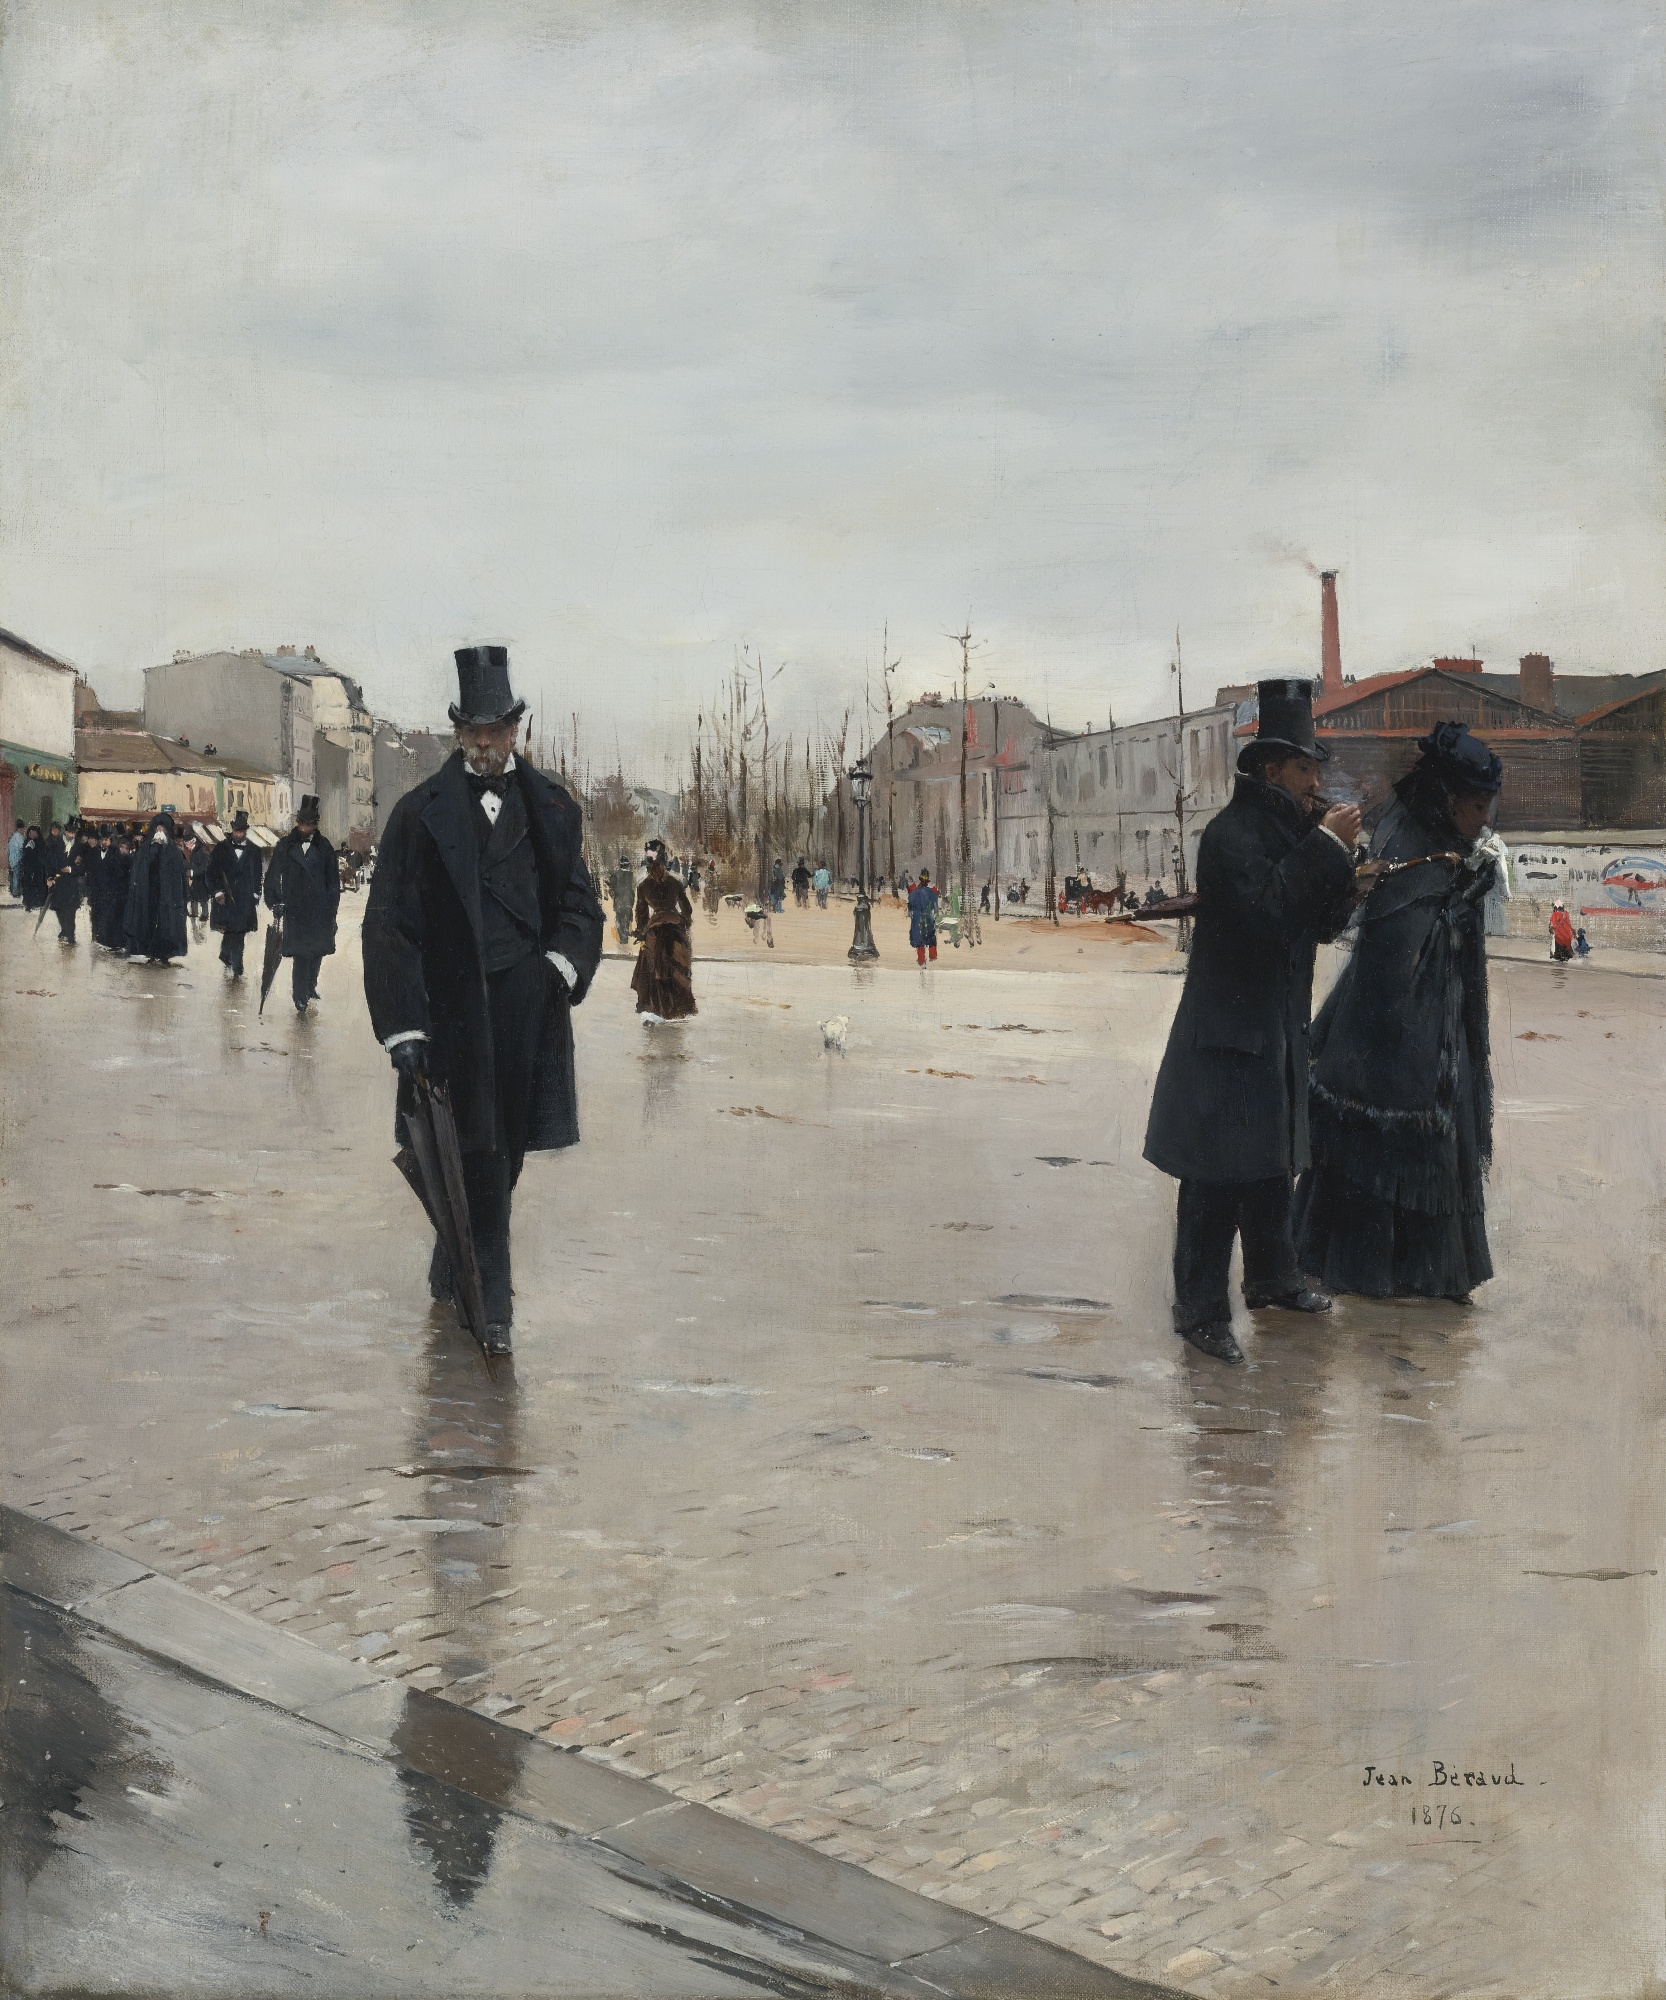 Leaving Montmartre Cemetery by Jean Béraud - 1876 - 66 x 53.3 cm private collection